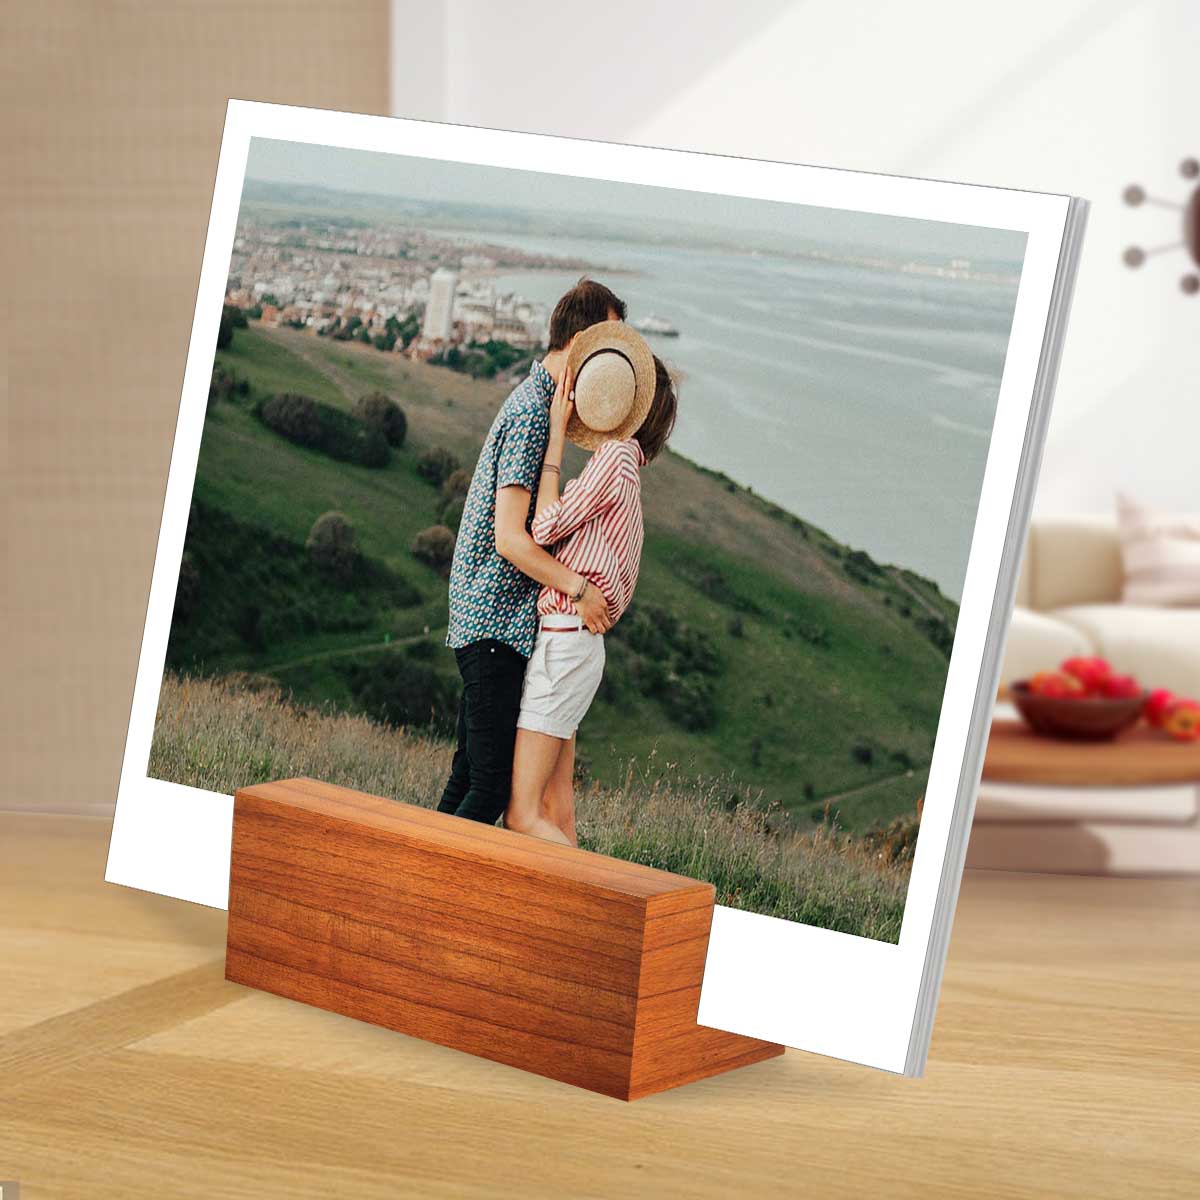 Our Memory Photo Wooden Block